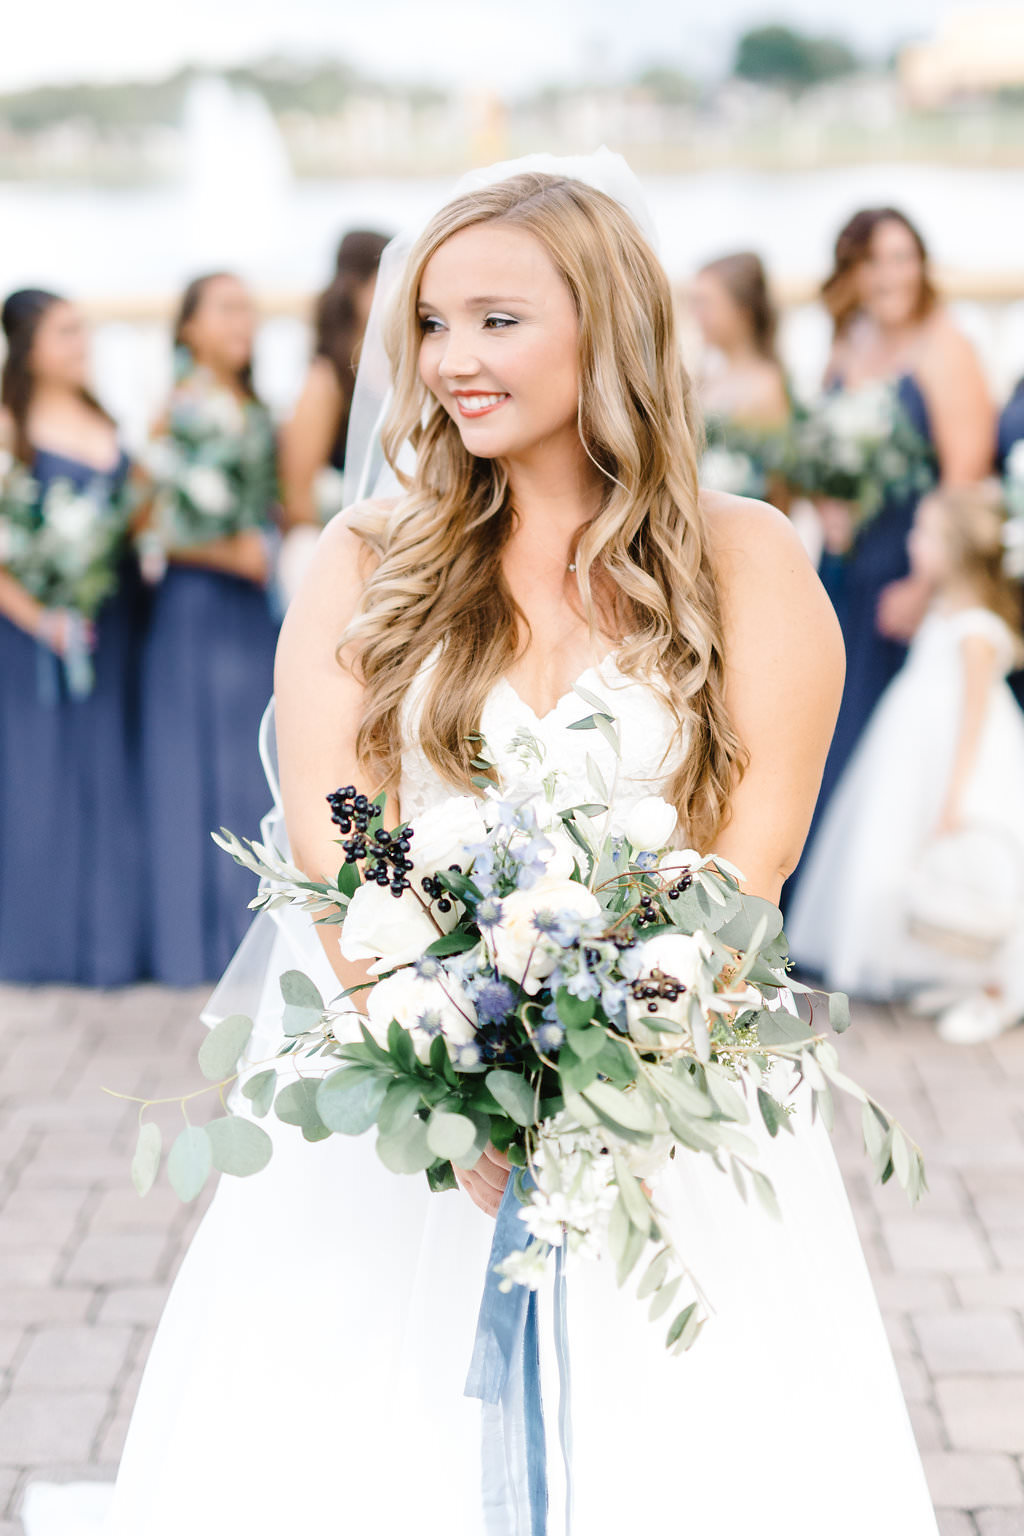 Tampa Bay Bride Wedding Portrait with Wild Organic White, Blue, and Silver Dollar Eucalyptus Greenery Floral Bouquet | Wedding Planner Love Lee Lane